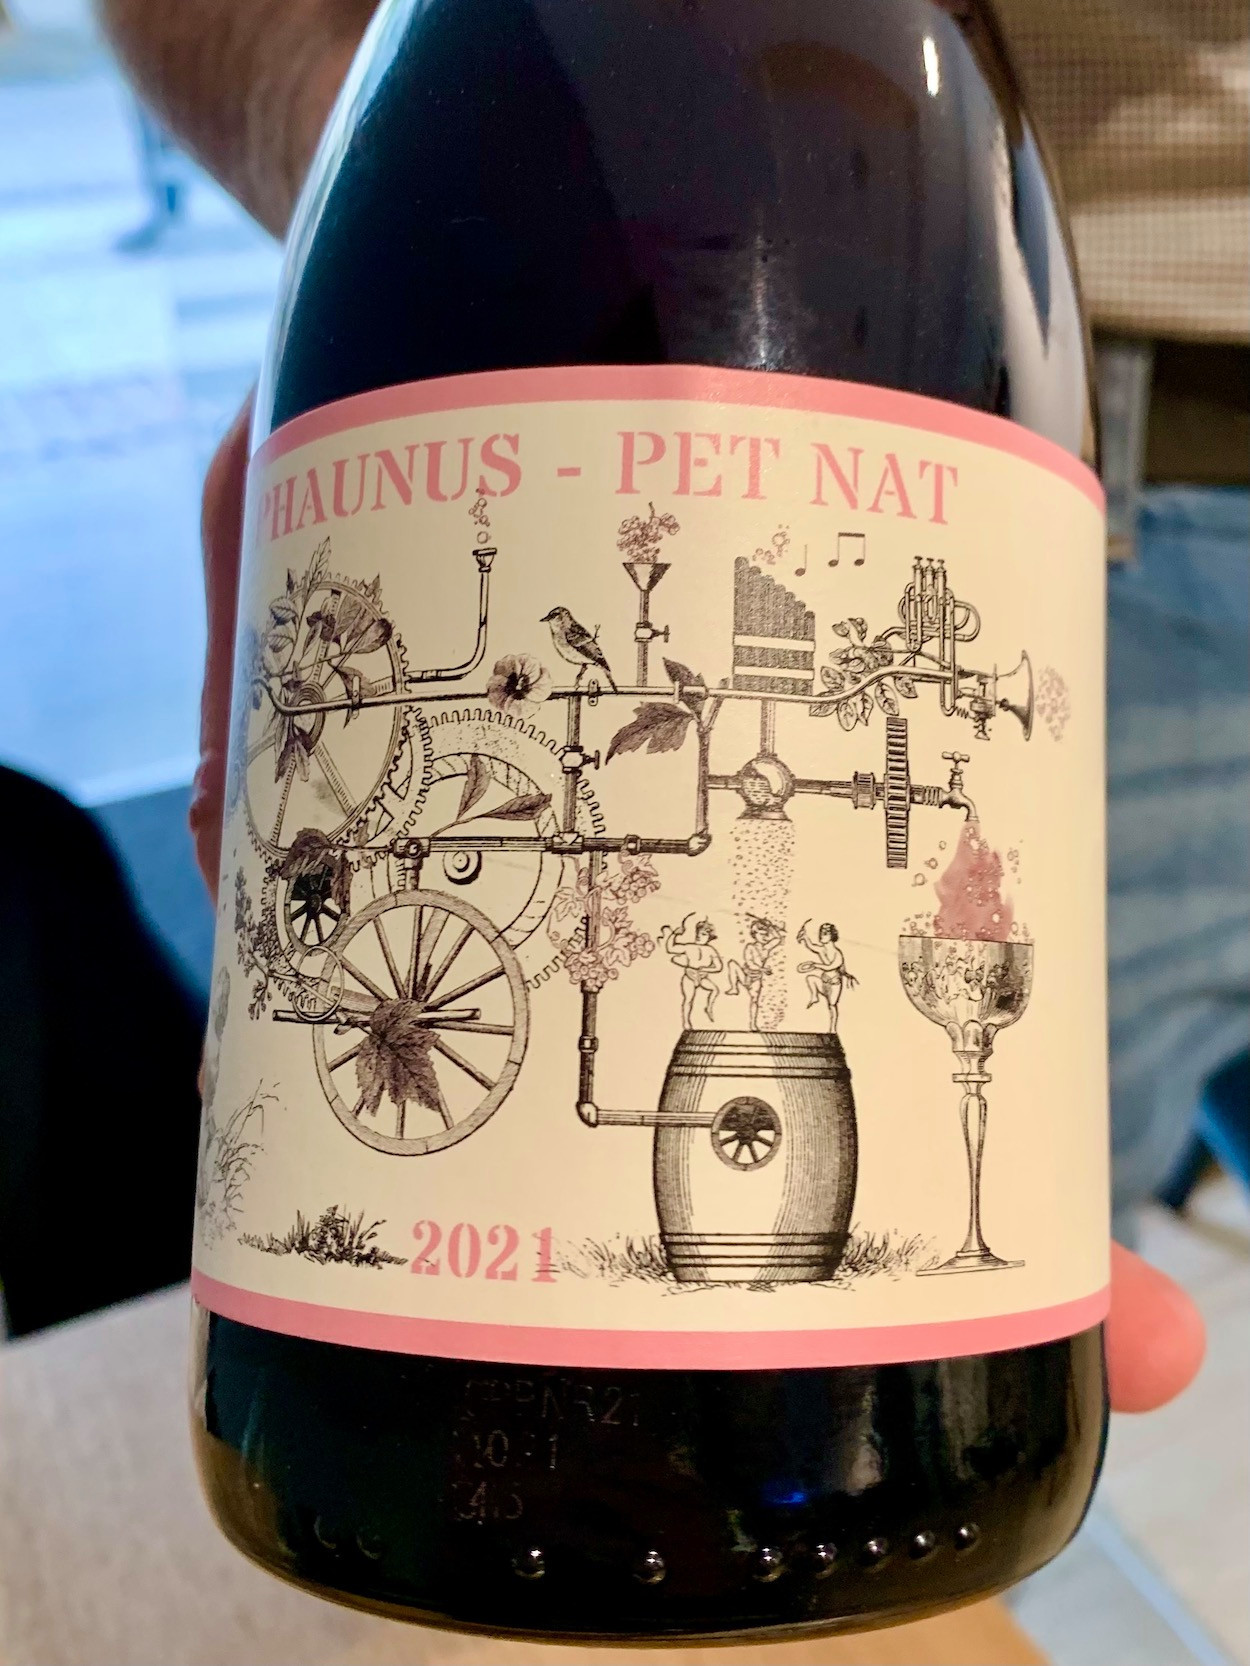 Phaunus, a natural Portuguese sparkling wine that is straightforward and as pleasant to drink as anything, is a good example of what is in Glou's cellar...  (Photo: Maison Moderne)